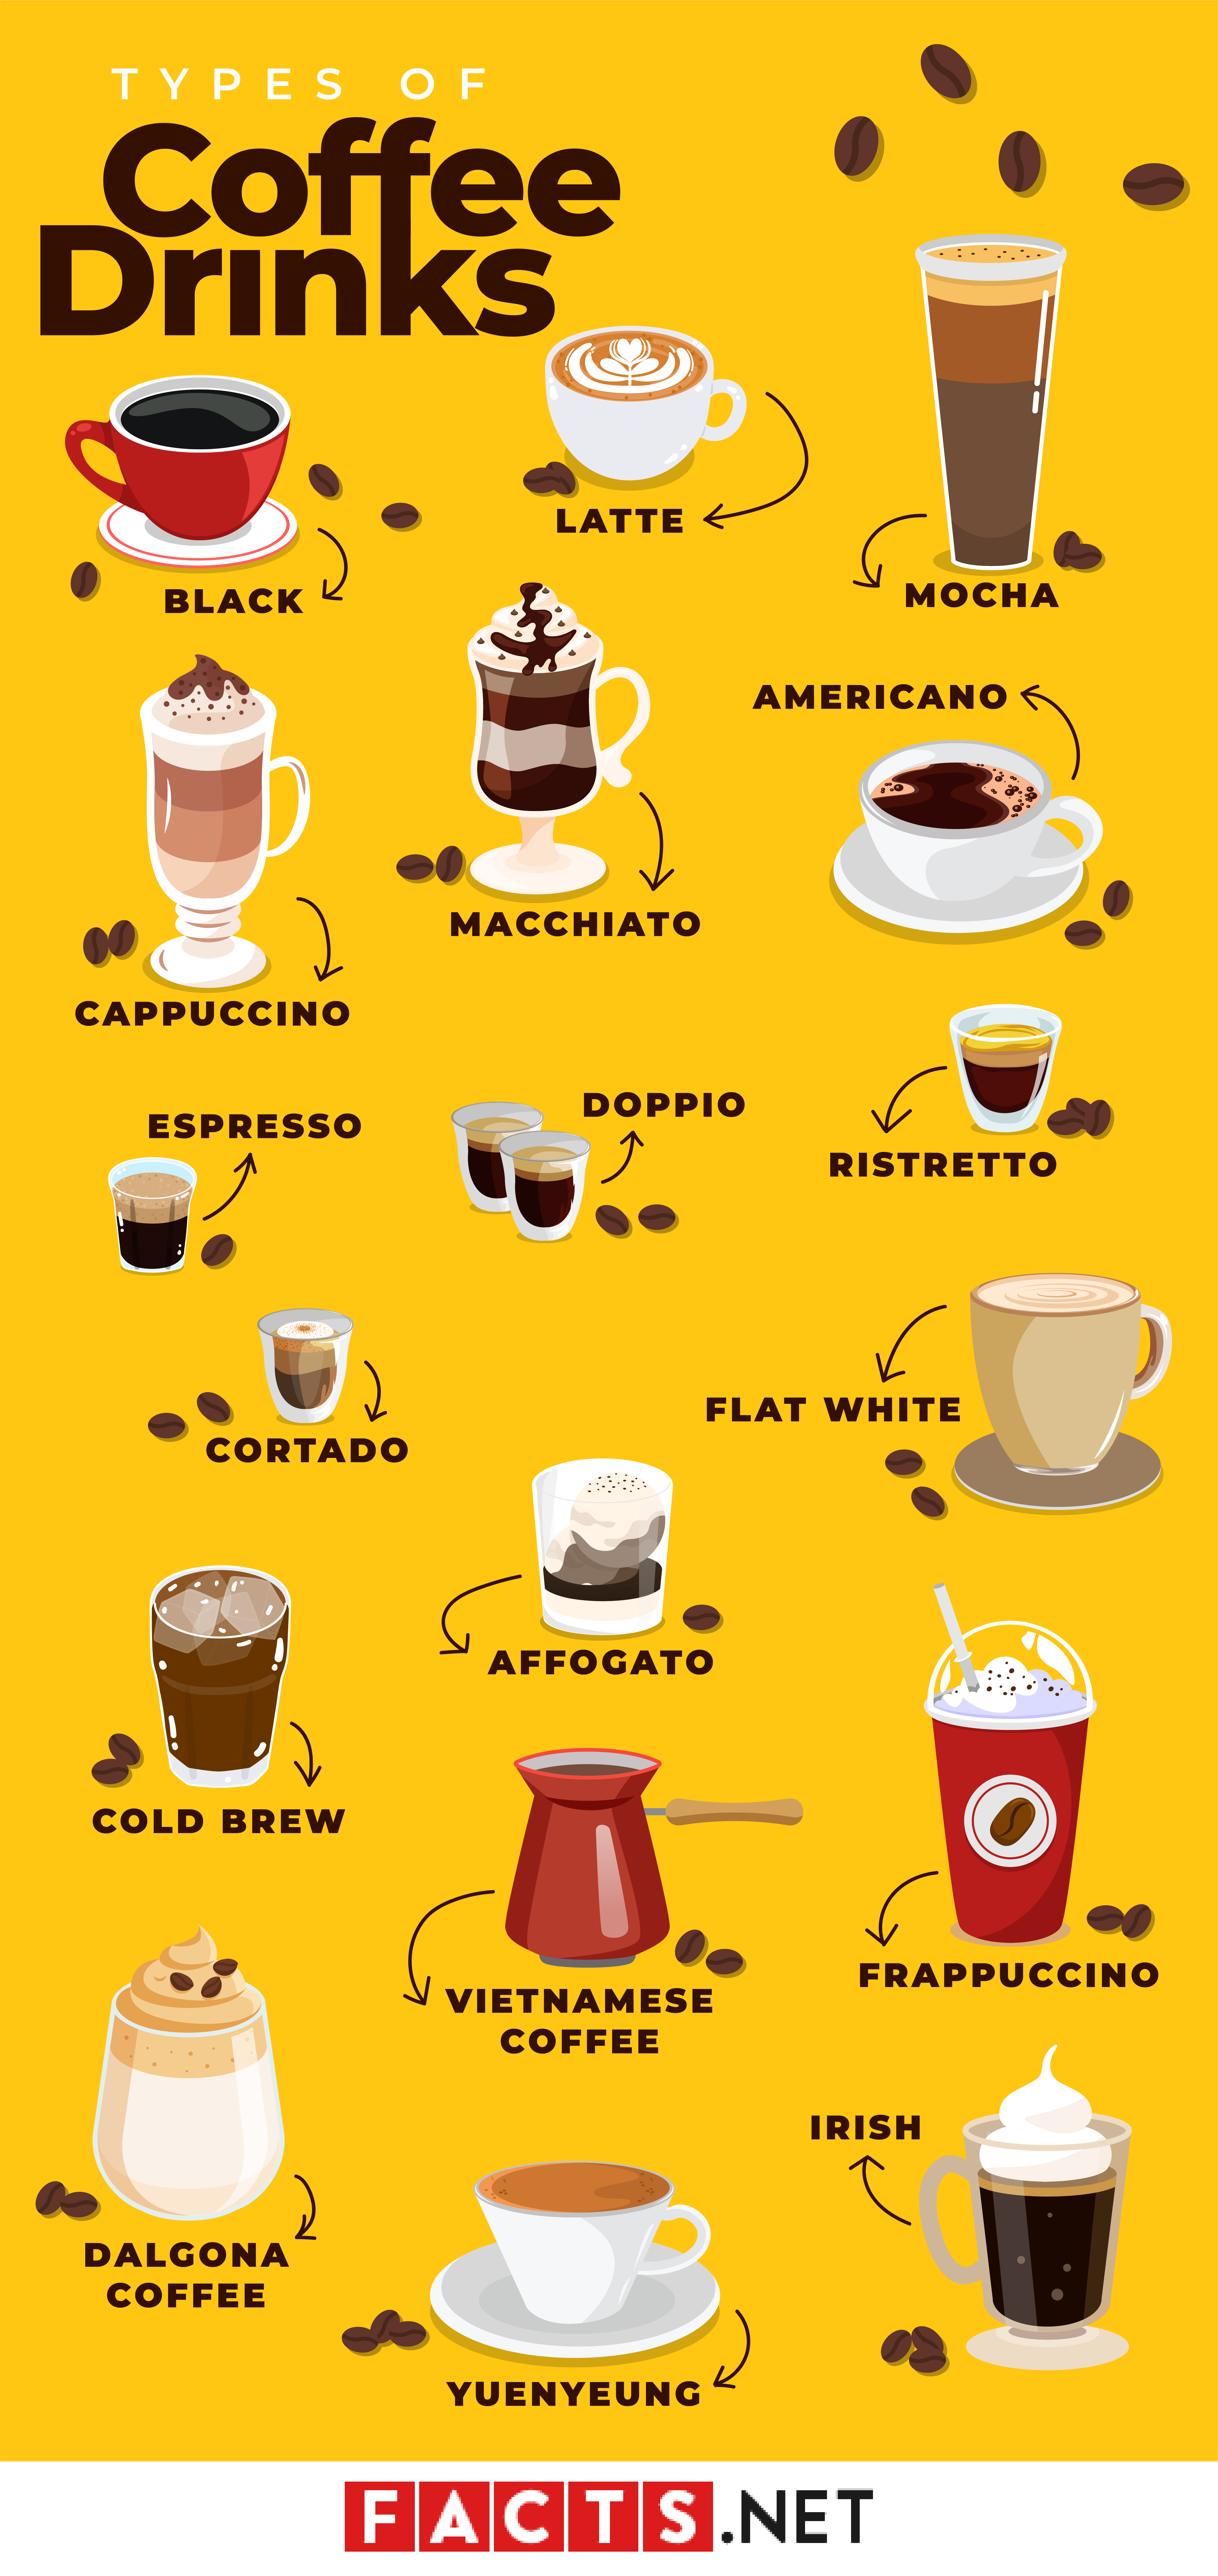 The 18 Different Types of Coffee Drinks Explained